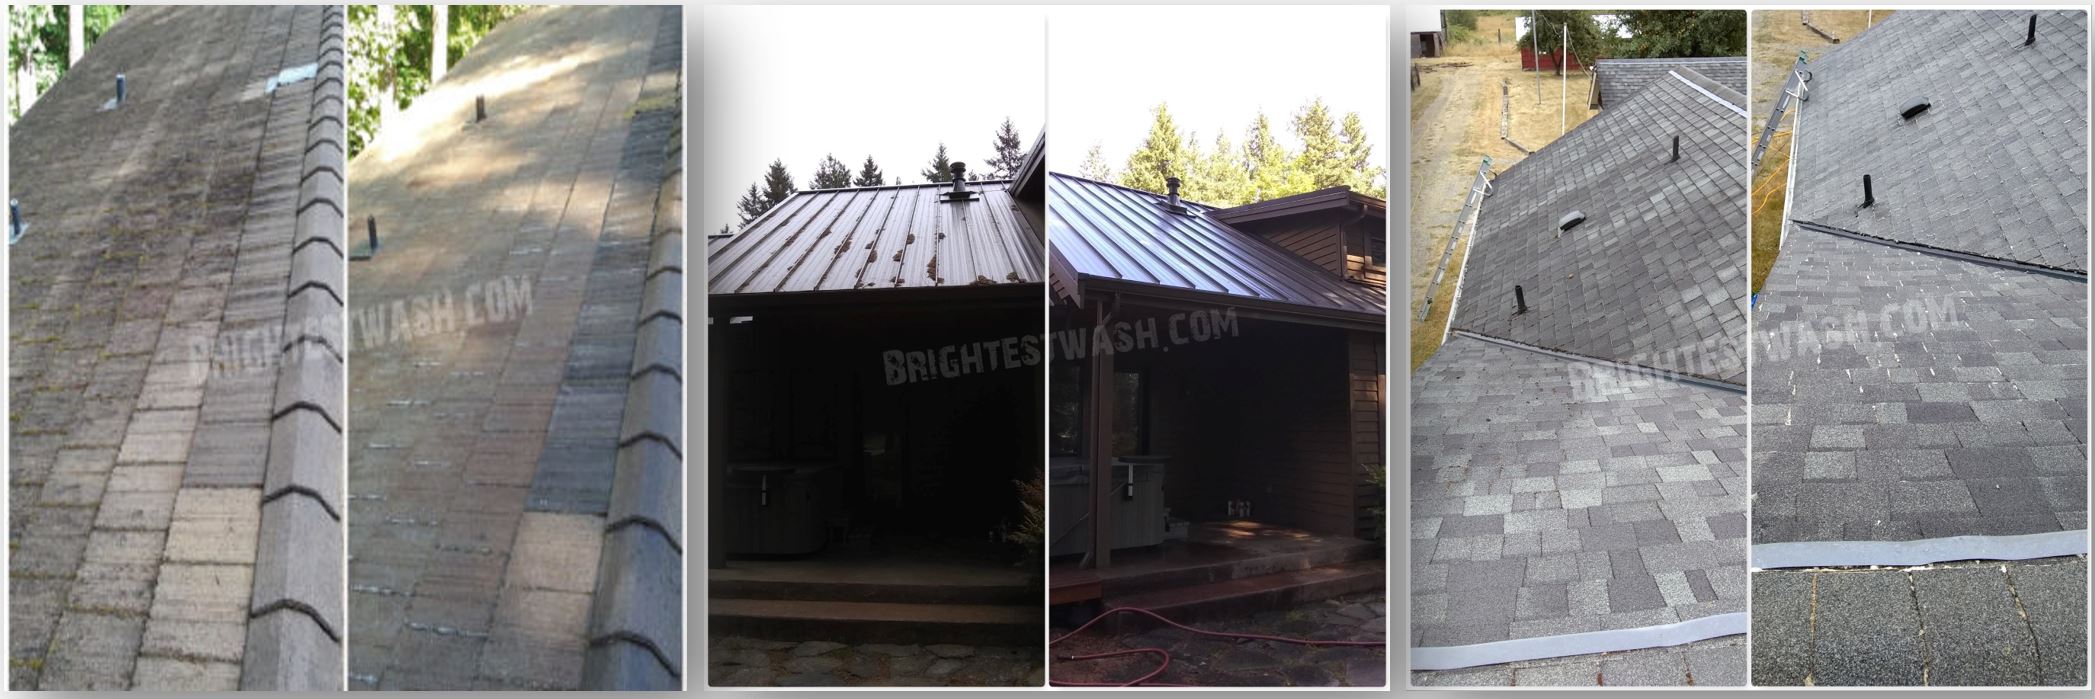  Best professional roof washing company in Belfair